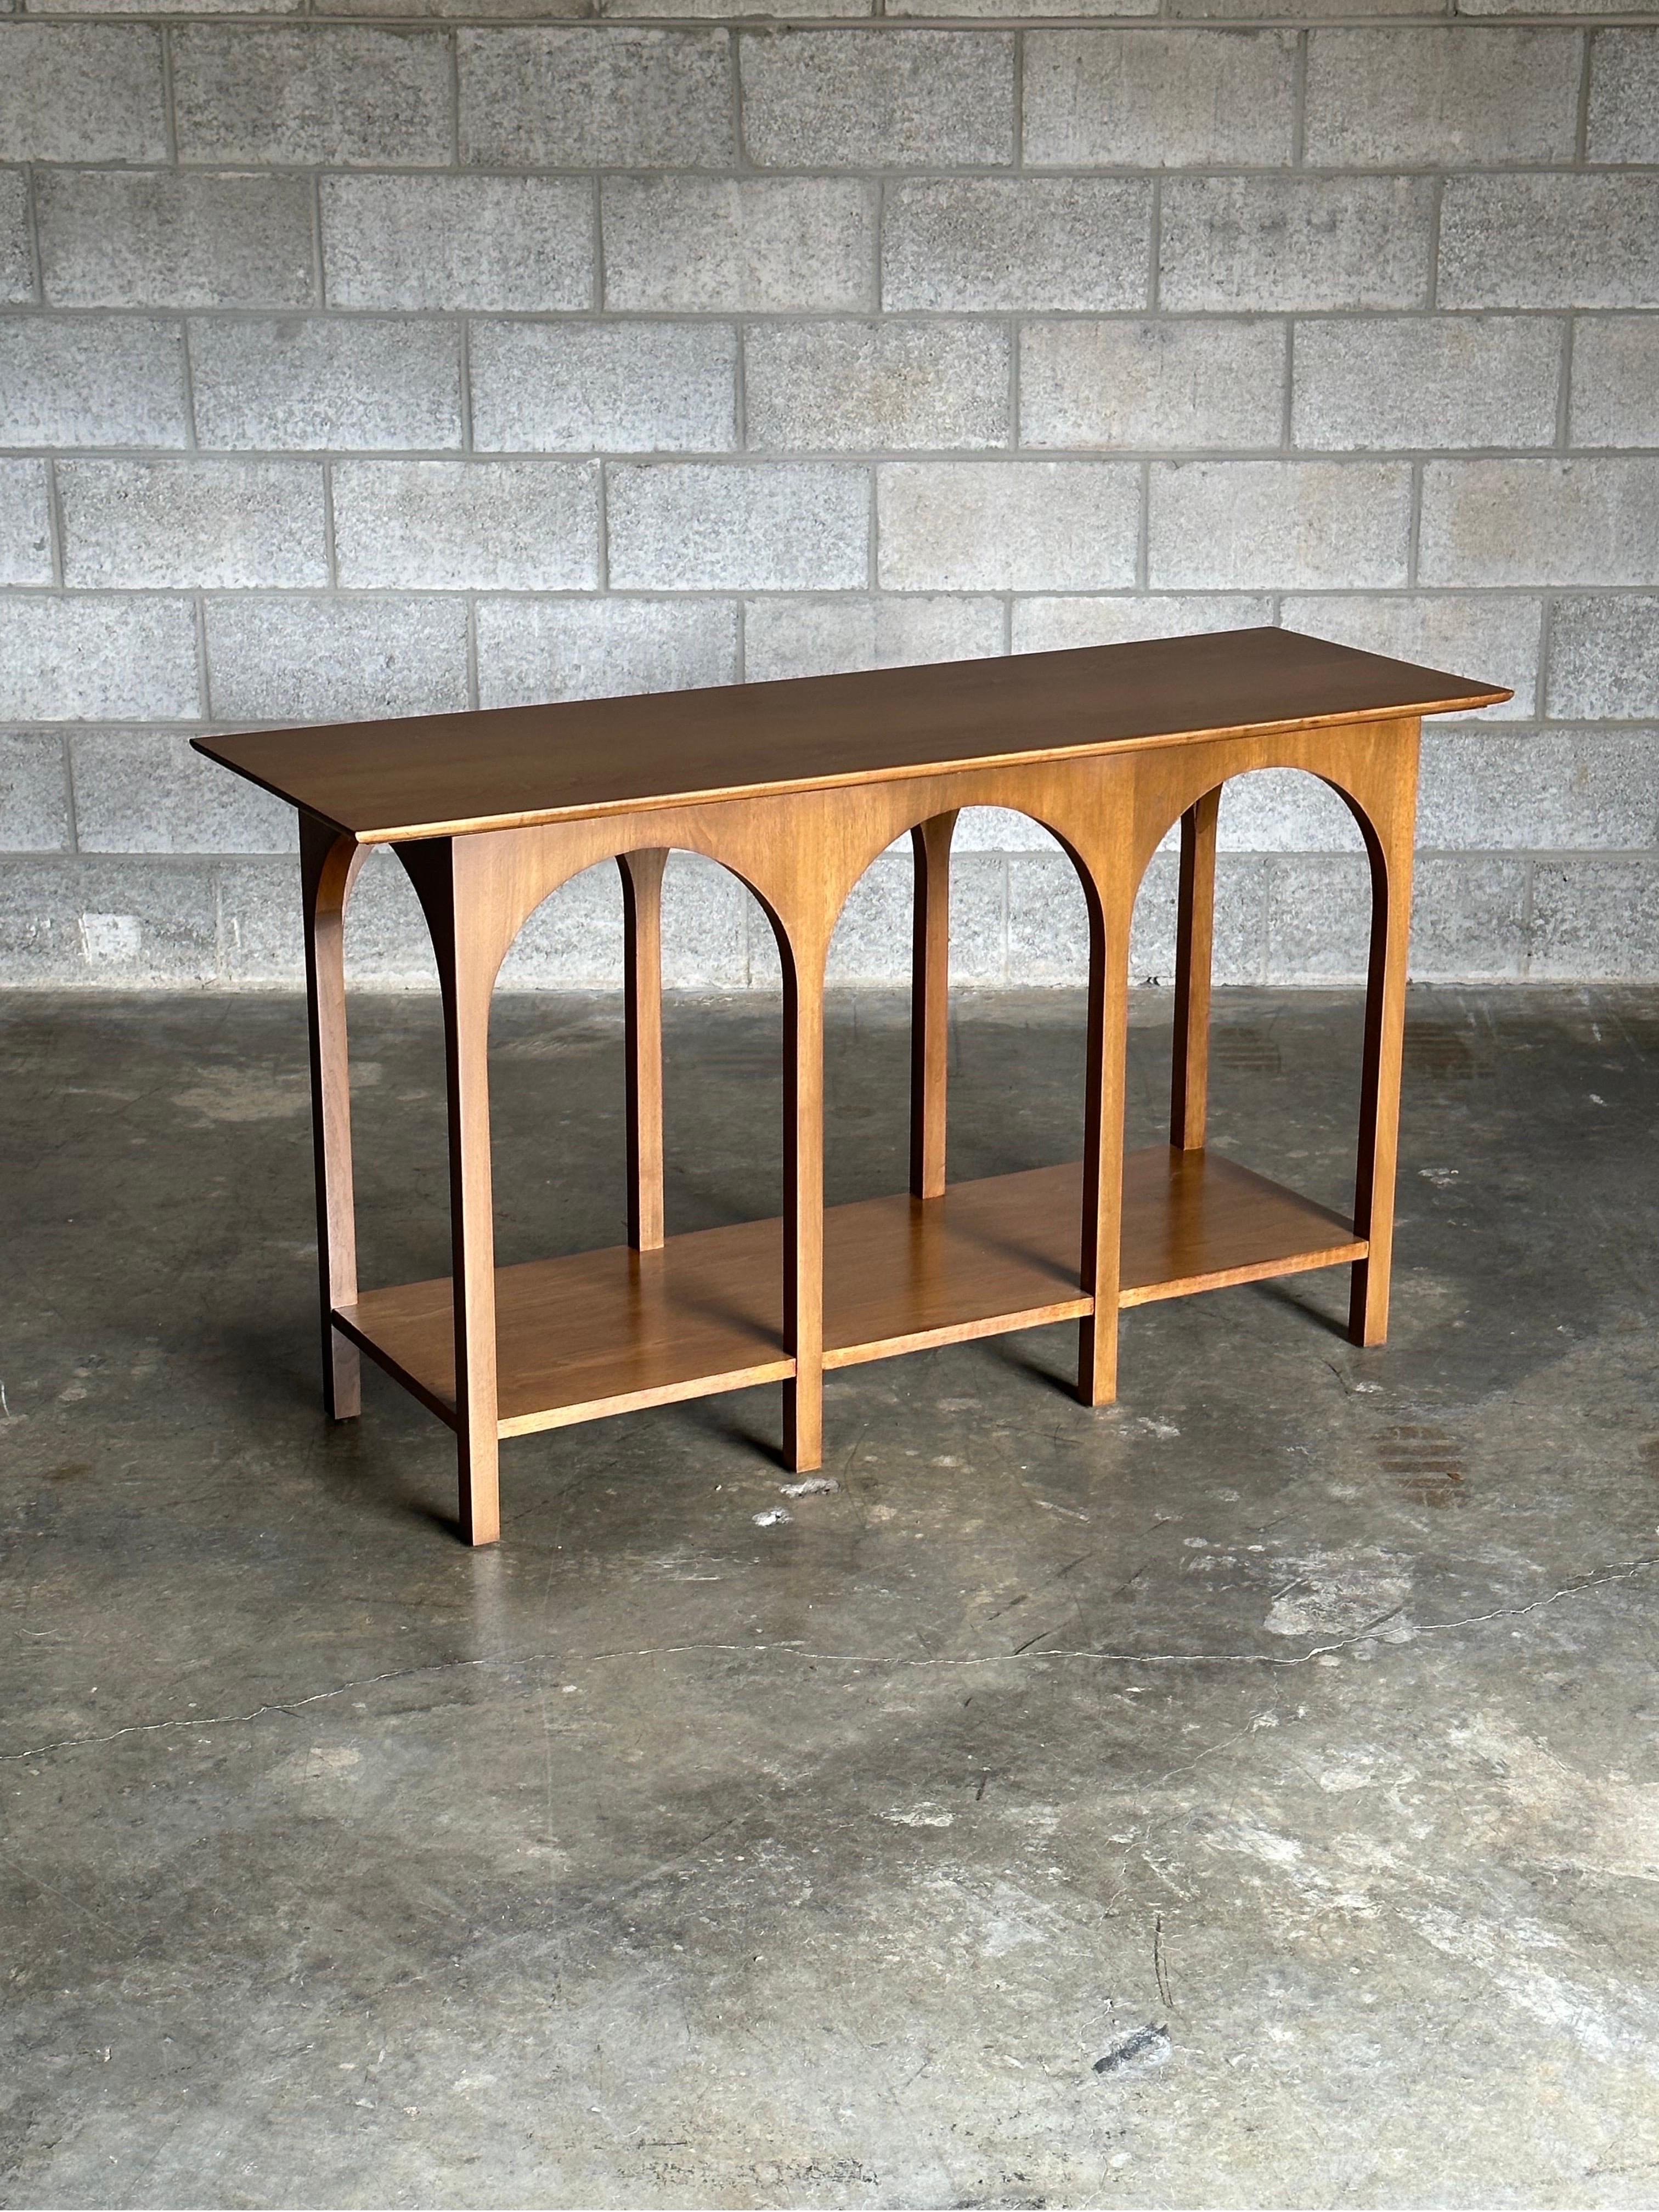 A stunning and rare console table designed by T.H. Robsjohn-Gibbings for Widdicomb, circa 1956. Features gorgeous arches creating what looks like partitioned display areas. This uncommon piece is from the line often referred to as the Coliseum